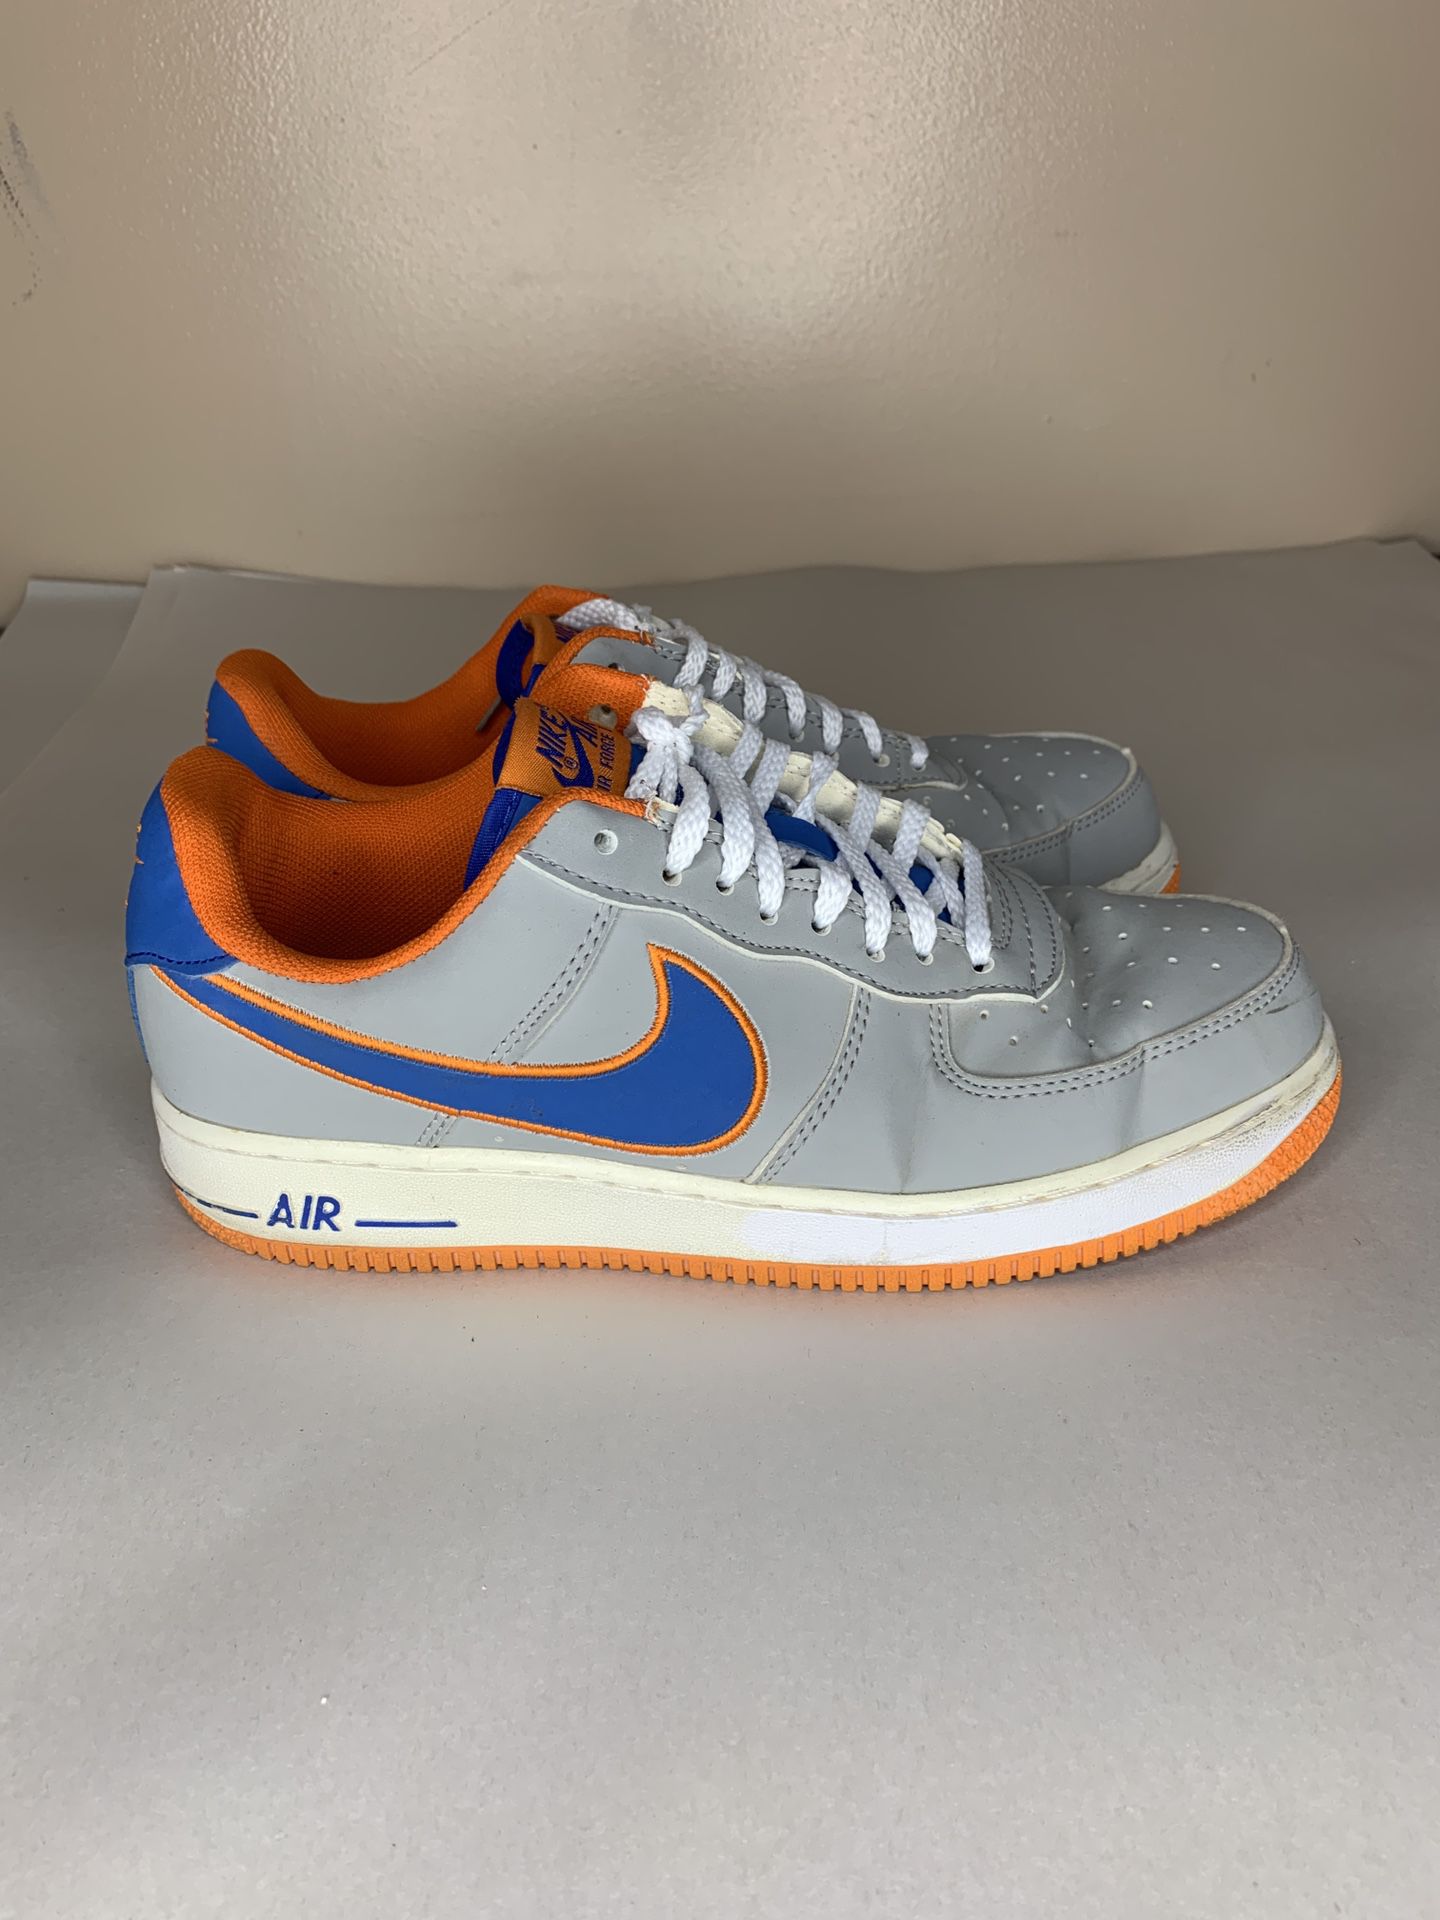 Nike Air Force 1 AF1 Low Gray Purple Orange Men's Size 8.5 Shoes (488298-013) Pre-owned  